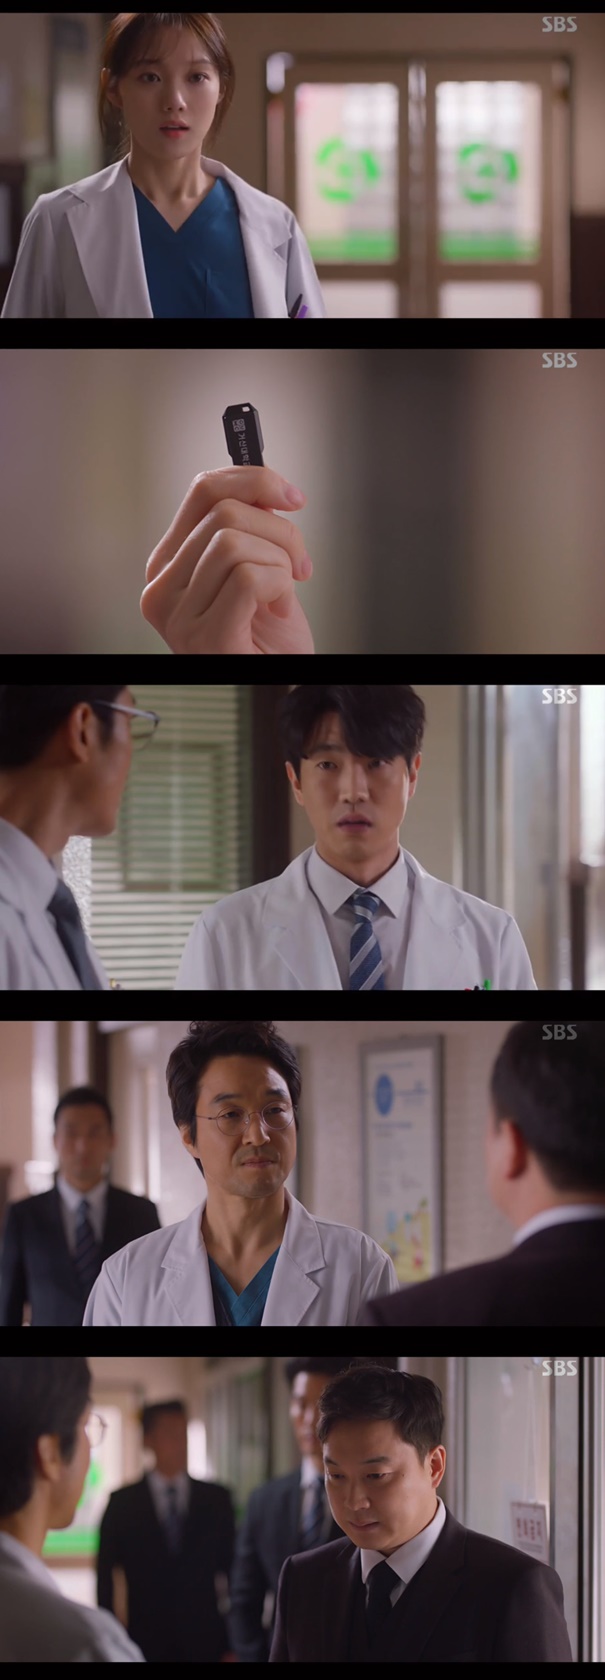 Romantic Doctor Kim Sabu 2 Han Suk-kyu took off Misunderstood with the help of Lee Sung-kyung.In SBS Mondays drama Romantic Doctor Kim Sabu 2 (playplayplay by Kang Eun-kyung and director Yoo In-sik), which was broadcast on the 14th, a Defense Minister son was shown demanding a second surgical recording video for Park Min-guk (Kim Joo-hun).Defense Ministerson determined there was a problem with the primary operation performed by Kim Sa-bu and declared that he would sue for a medical accident.He asked Park Min-guk for a second surgery recording video to prove it.Yang Ho-joon (Ko Sang-ho) tried to hide a copy of the second surgery recording against them on USB. I think the report is wrong.There is no such thing as a recorded surgical image. Lee Sung-kyung, who saw this, said, This is yours, right? I was in the dressing room.So Yang checked the USB in his pocket, and Cha Eun-jae said, You had it. I thought you dropped it. Thats it, right? A copy of the second surgery.Defense Ministerson confirmed the presence of the second surgery recording video.Defense Ministerson found out that it was not Kim Sabus medical accident, and went to Kim Sabu; he said, I did Missunderstood.I should have known better. I dont think Ive been able to finish it since I heard that its hard to see that condition and that its not finished after the second surgery.I am so sorry, he said, bowing his head.